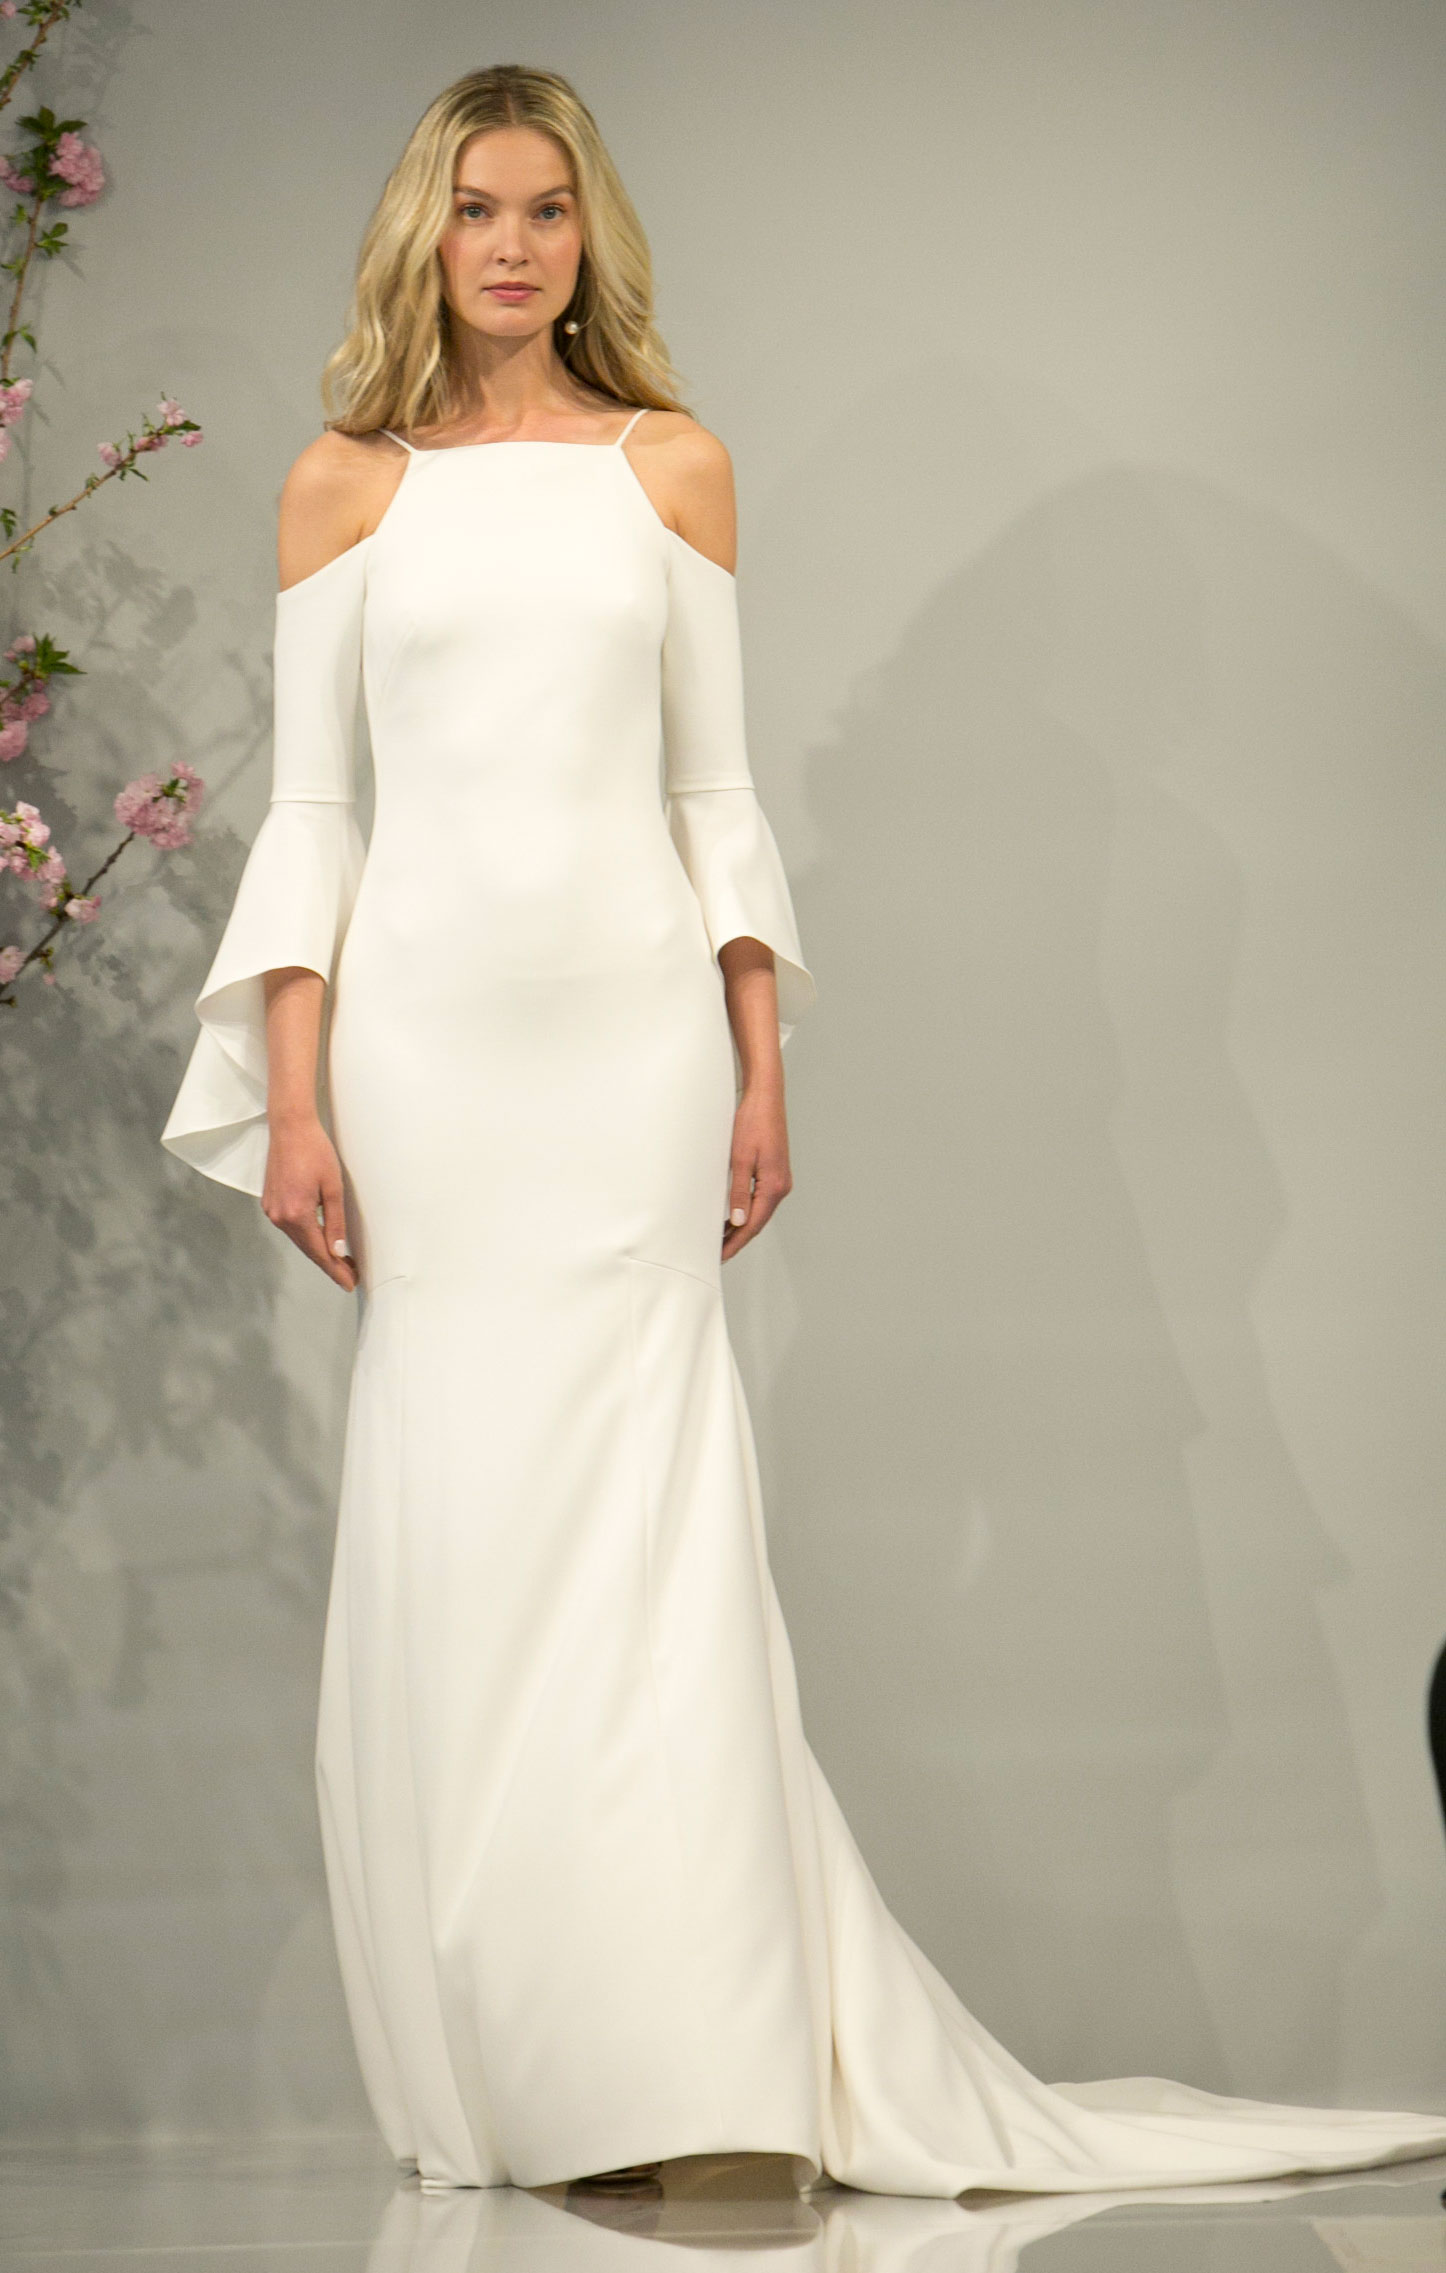 Royal Wedding gown inspiration by THEIA